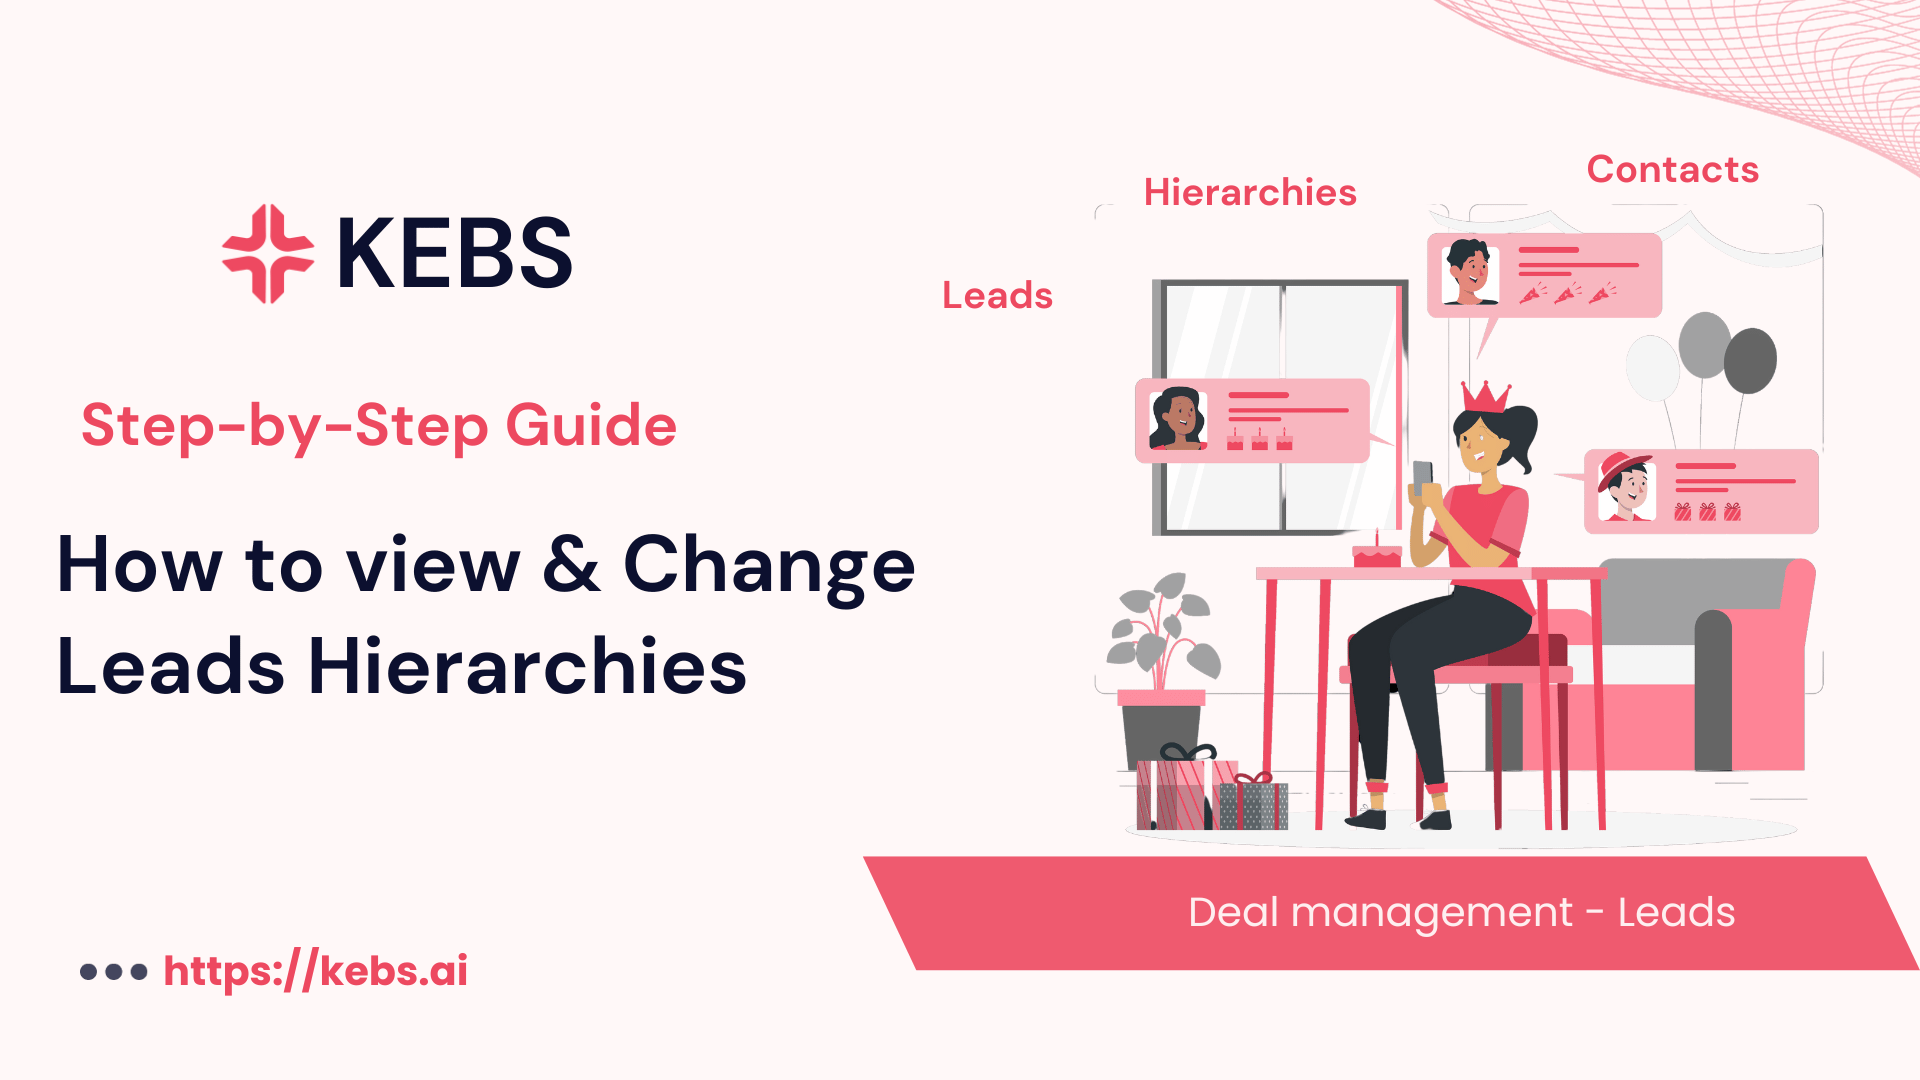 How to view & Change Leads Hierarchies